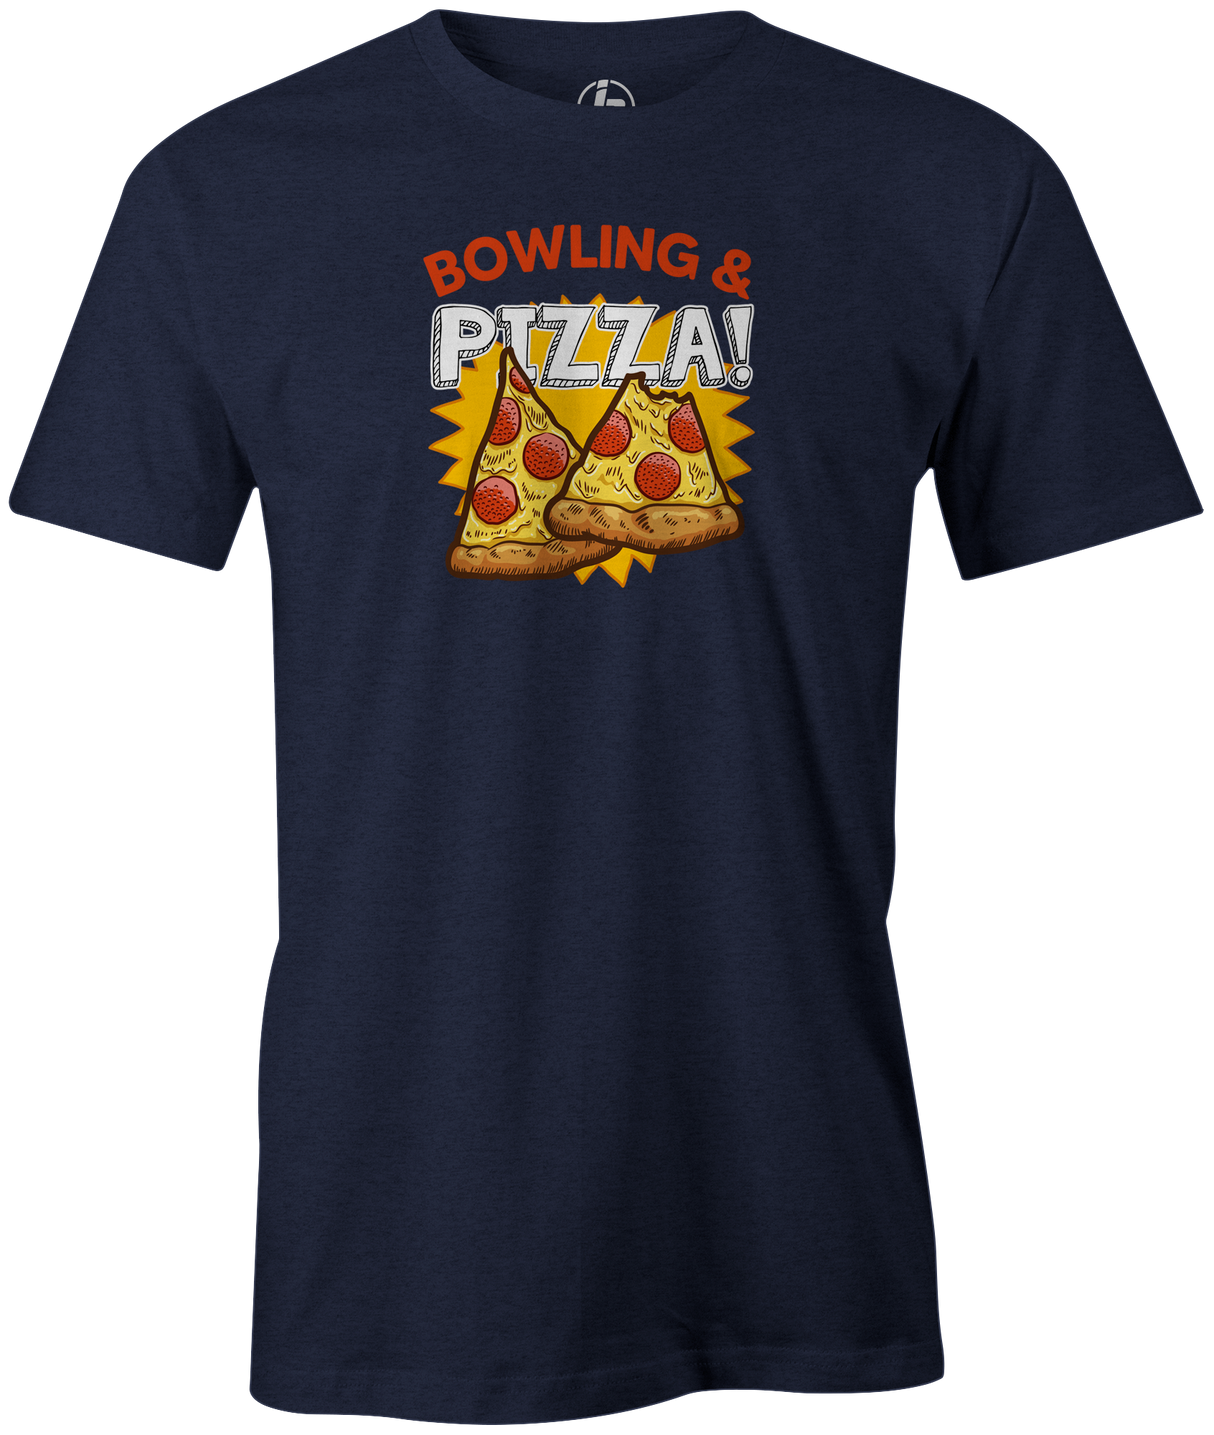 Bowling & Pizza Men's Bowling shirt, navy, tee, tee-shirt, tee shirt, apparel, merch, cool, funny, vintage, gift, present, cheap, discount, free shipping, lifestlye, food, snack bar, delicious.